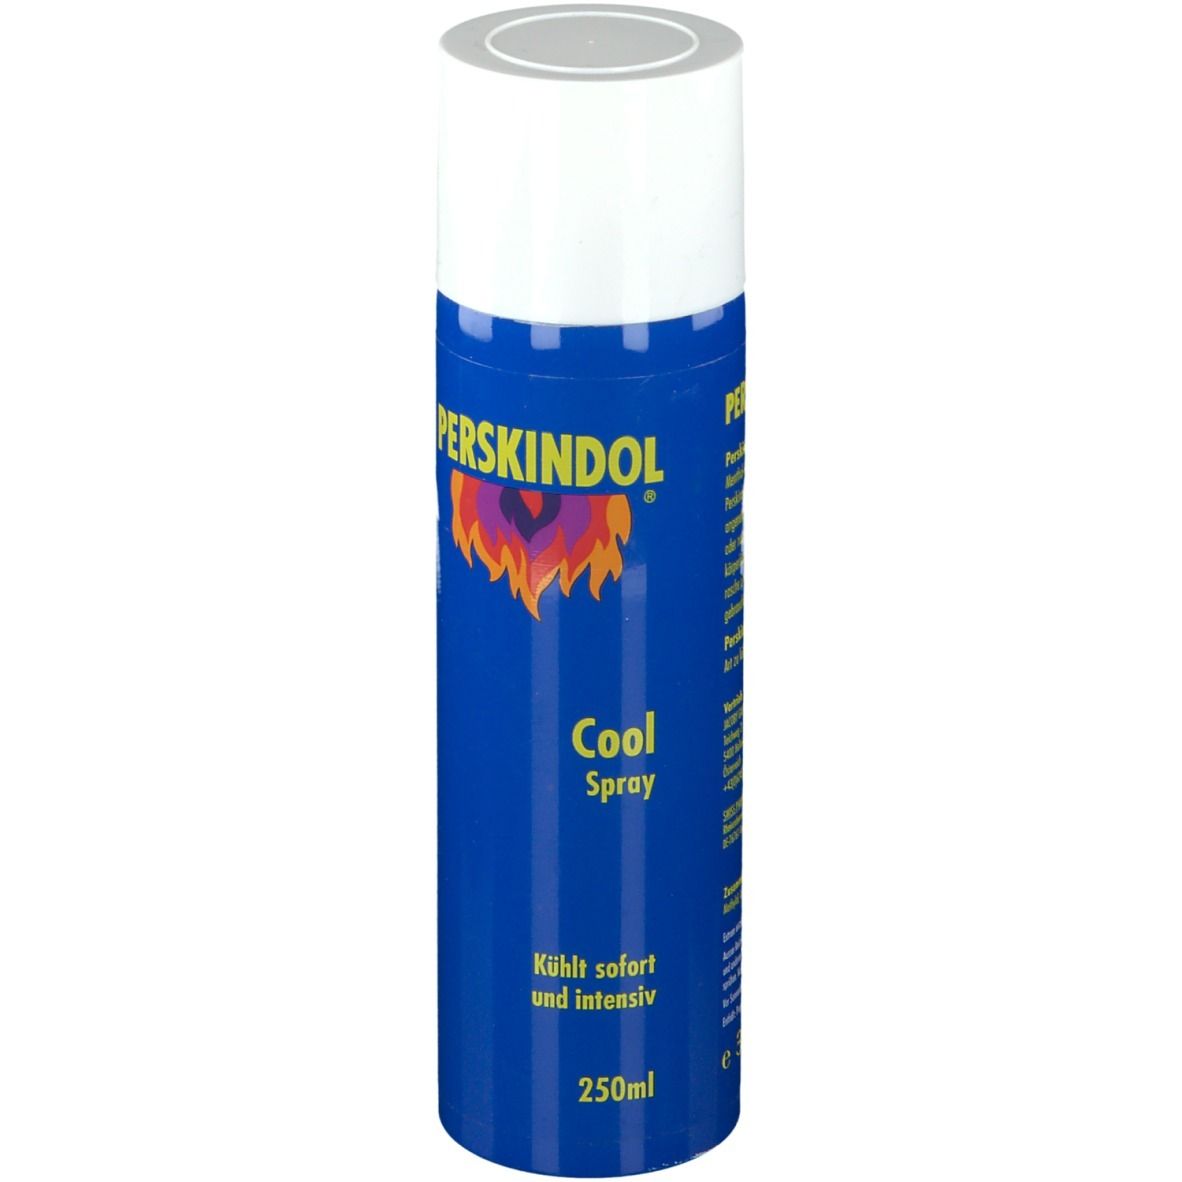 Image of PERSKINDOL Cool Spray